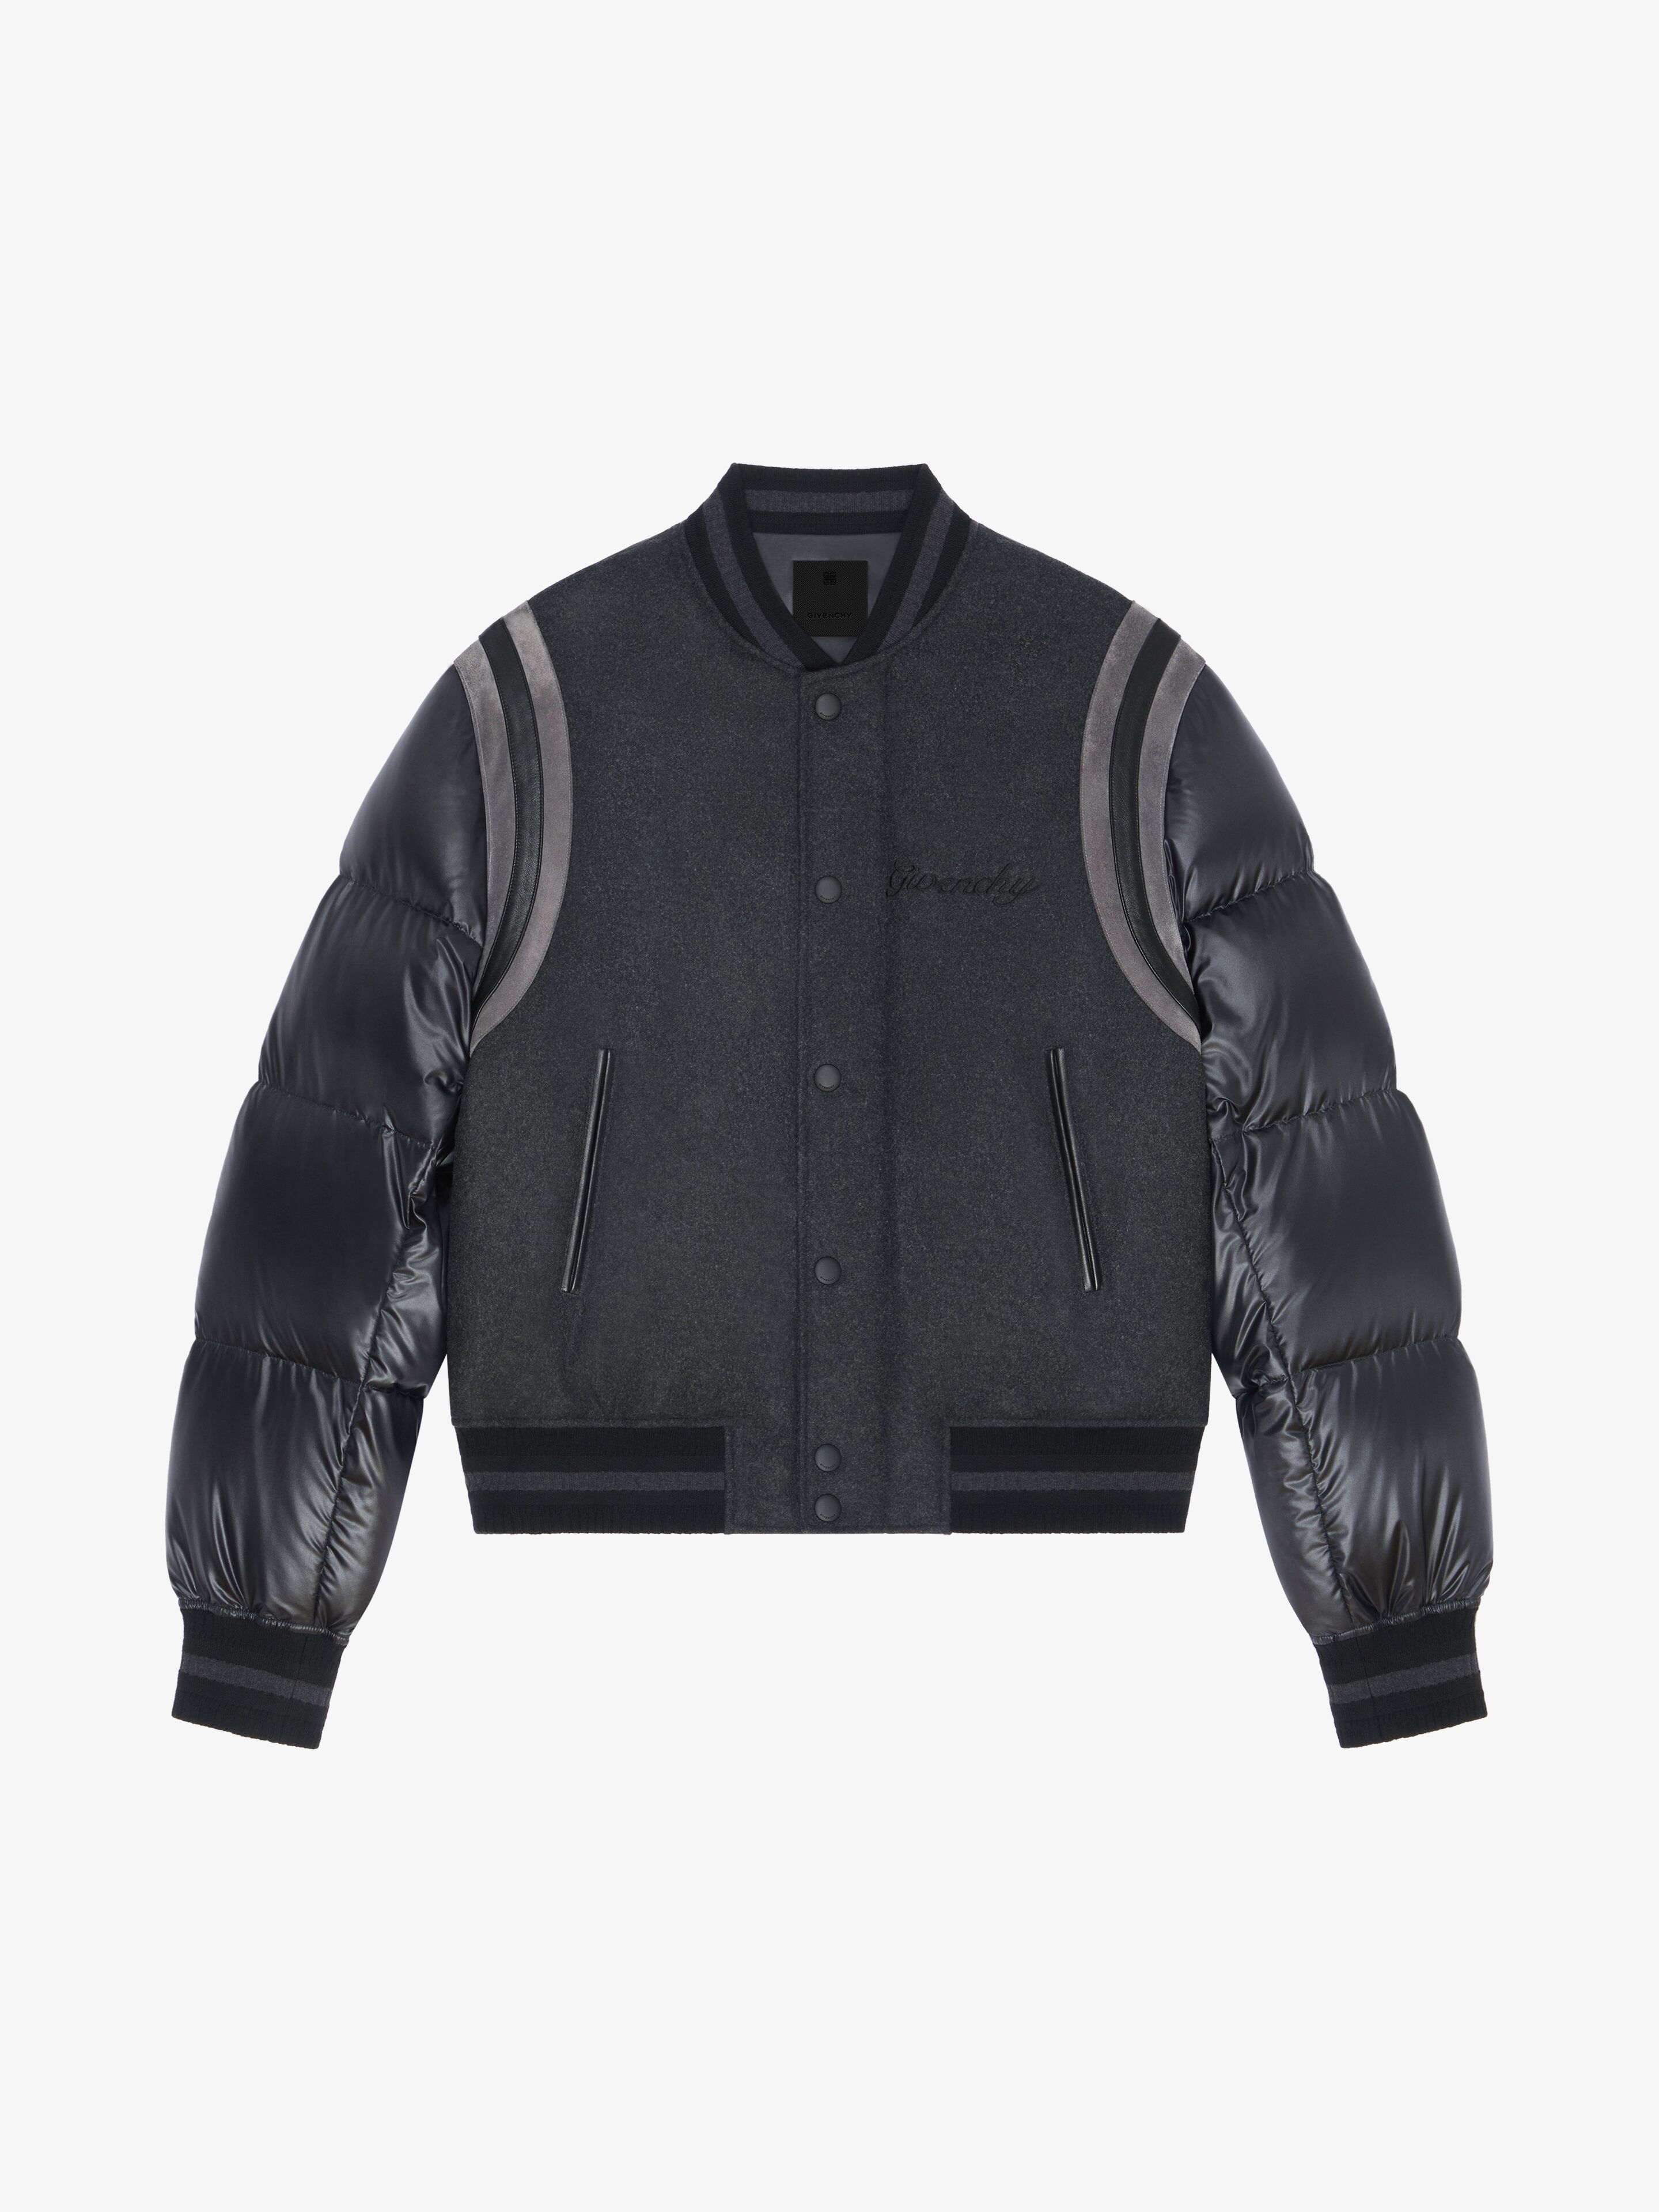 Shop Givenchy Varsity Jacket In Wool With Puffer Sleeves And Back In Black/grey